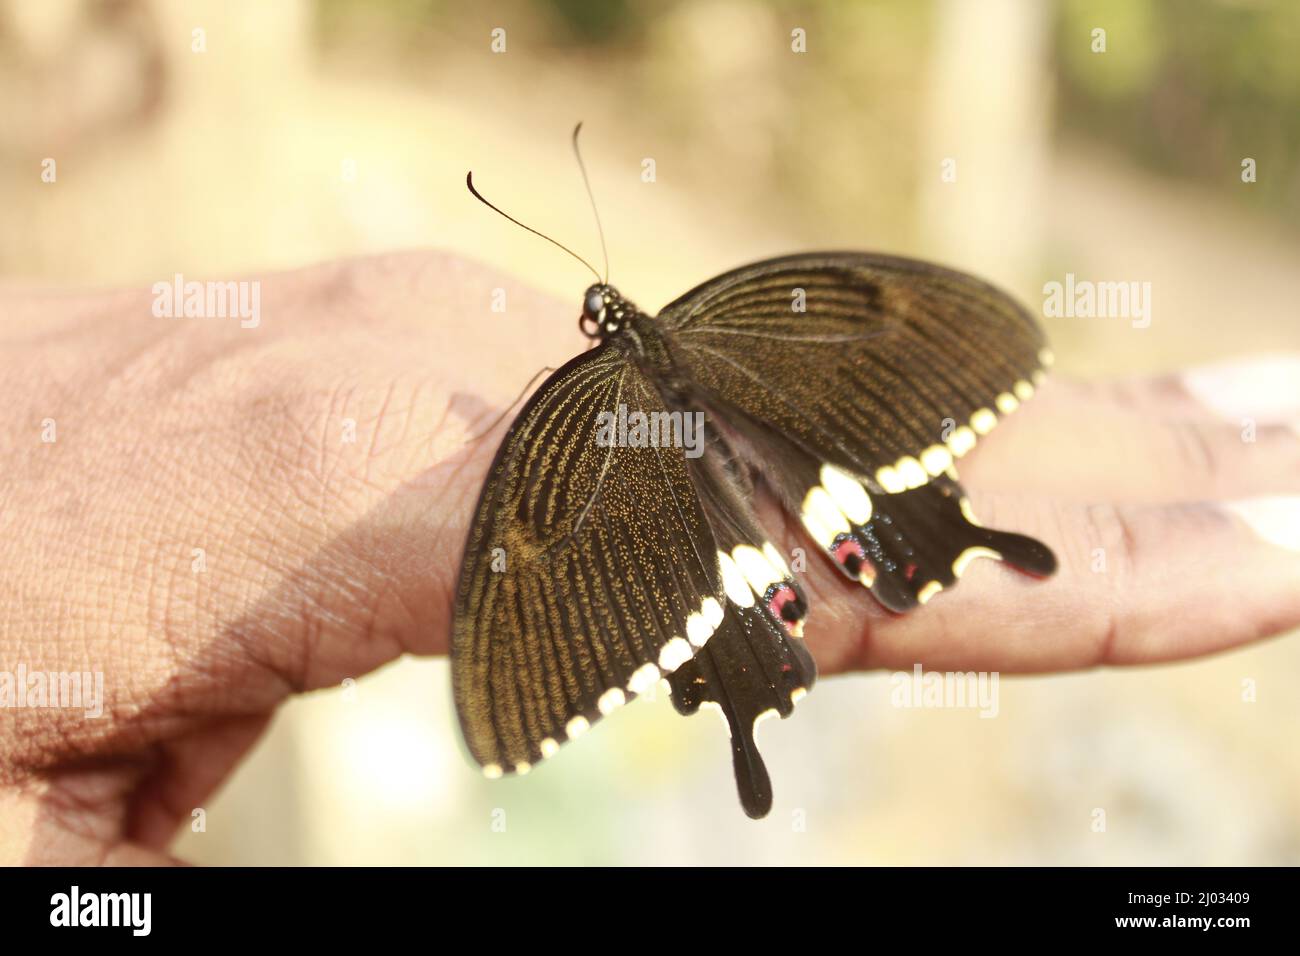 Butterfly on the hand. In motion concept isolated, Copy Space Stock Photo